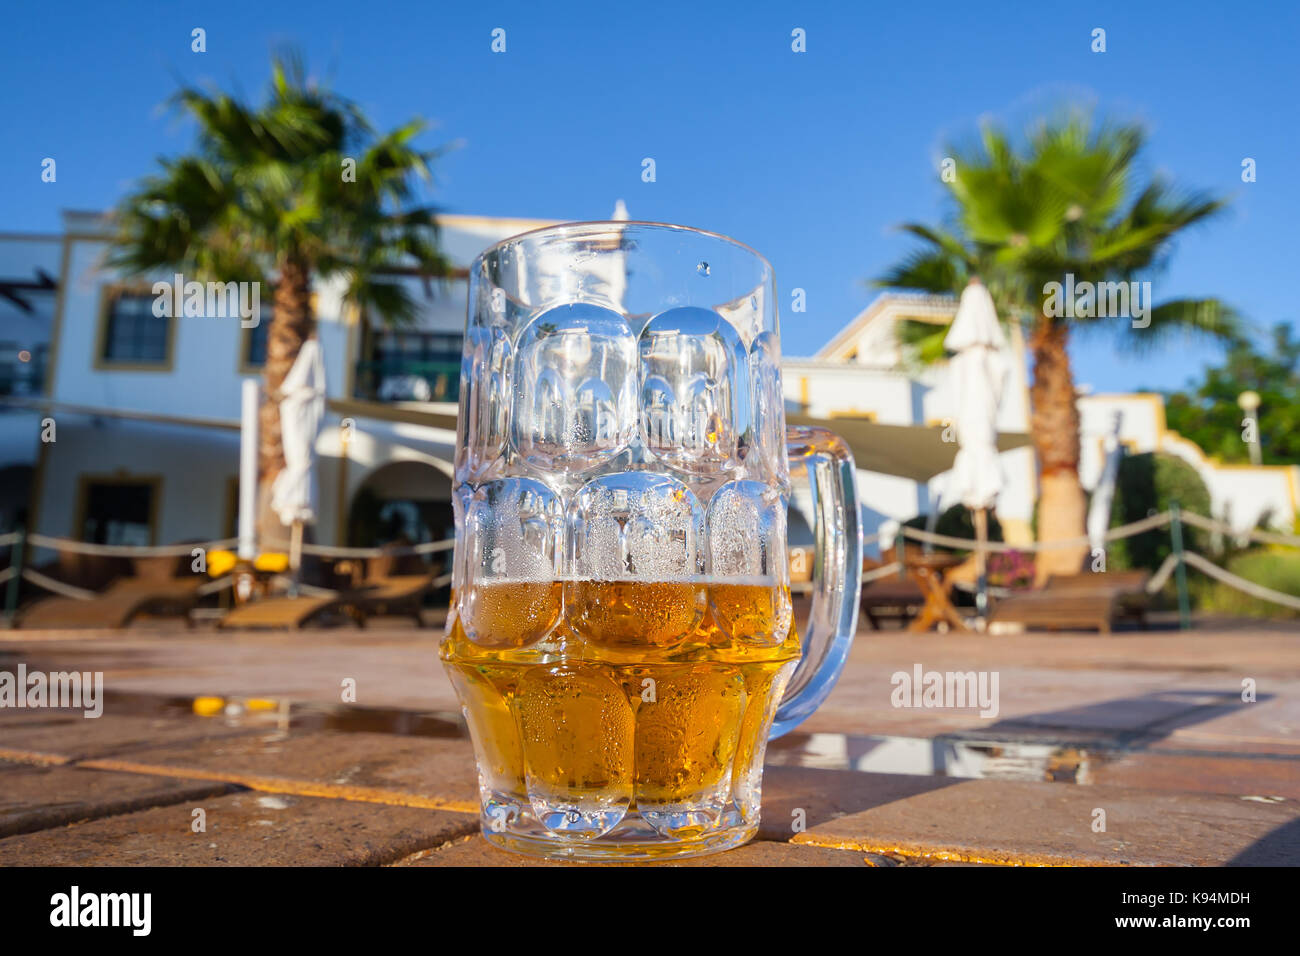 A pool view of a hotel in The Algarve on Portugal's South coast. Stock Photo